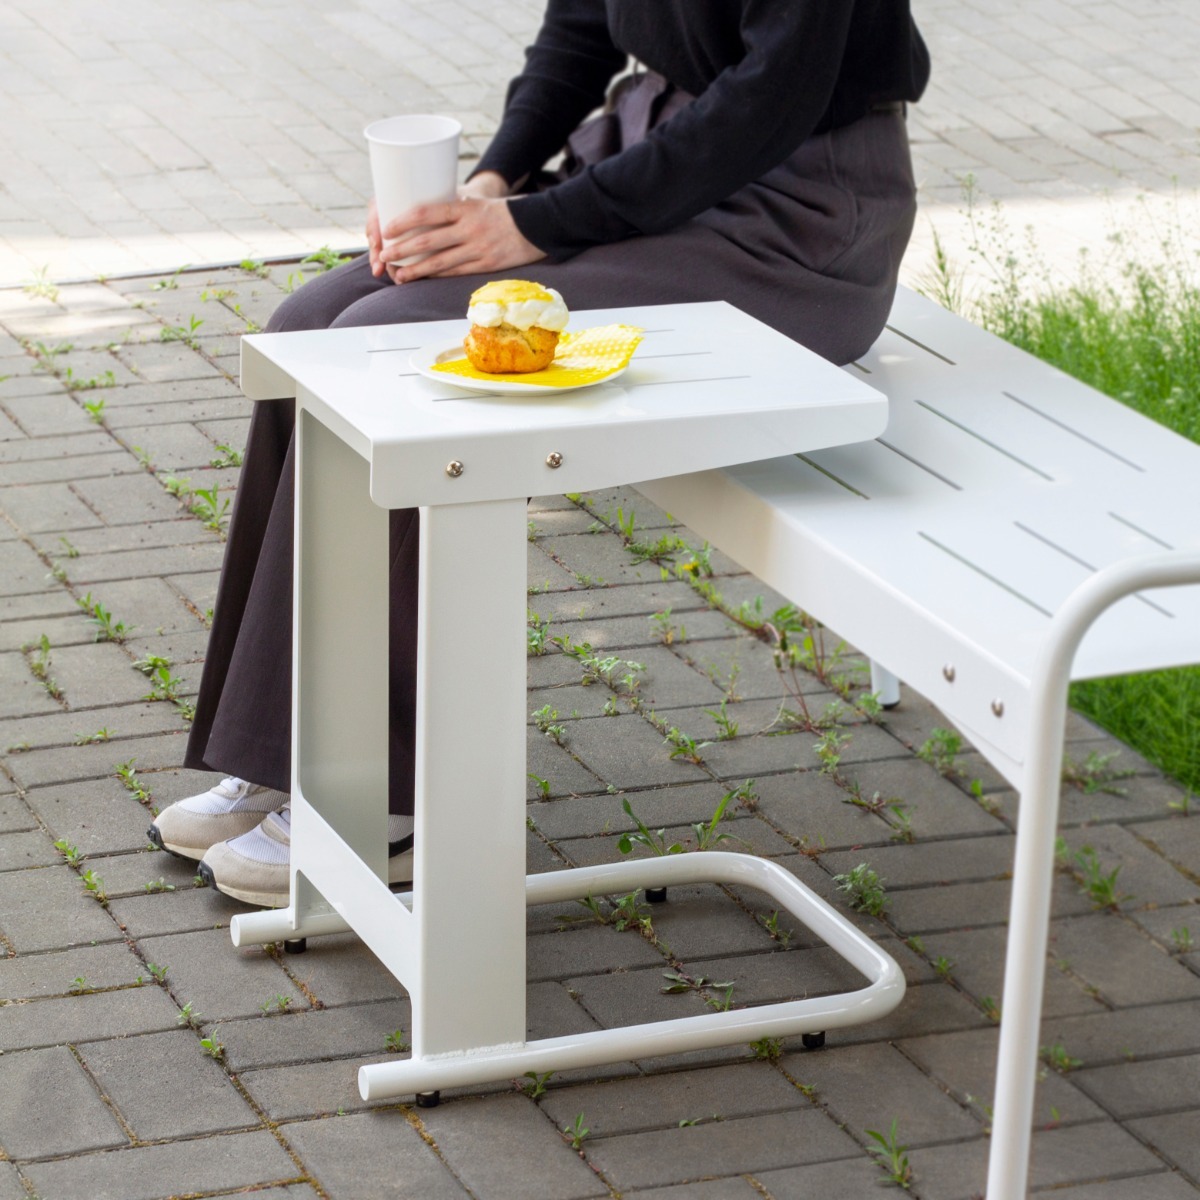 10. PARK SIDE TABLE